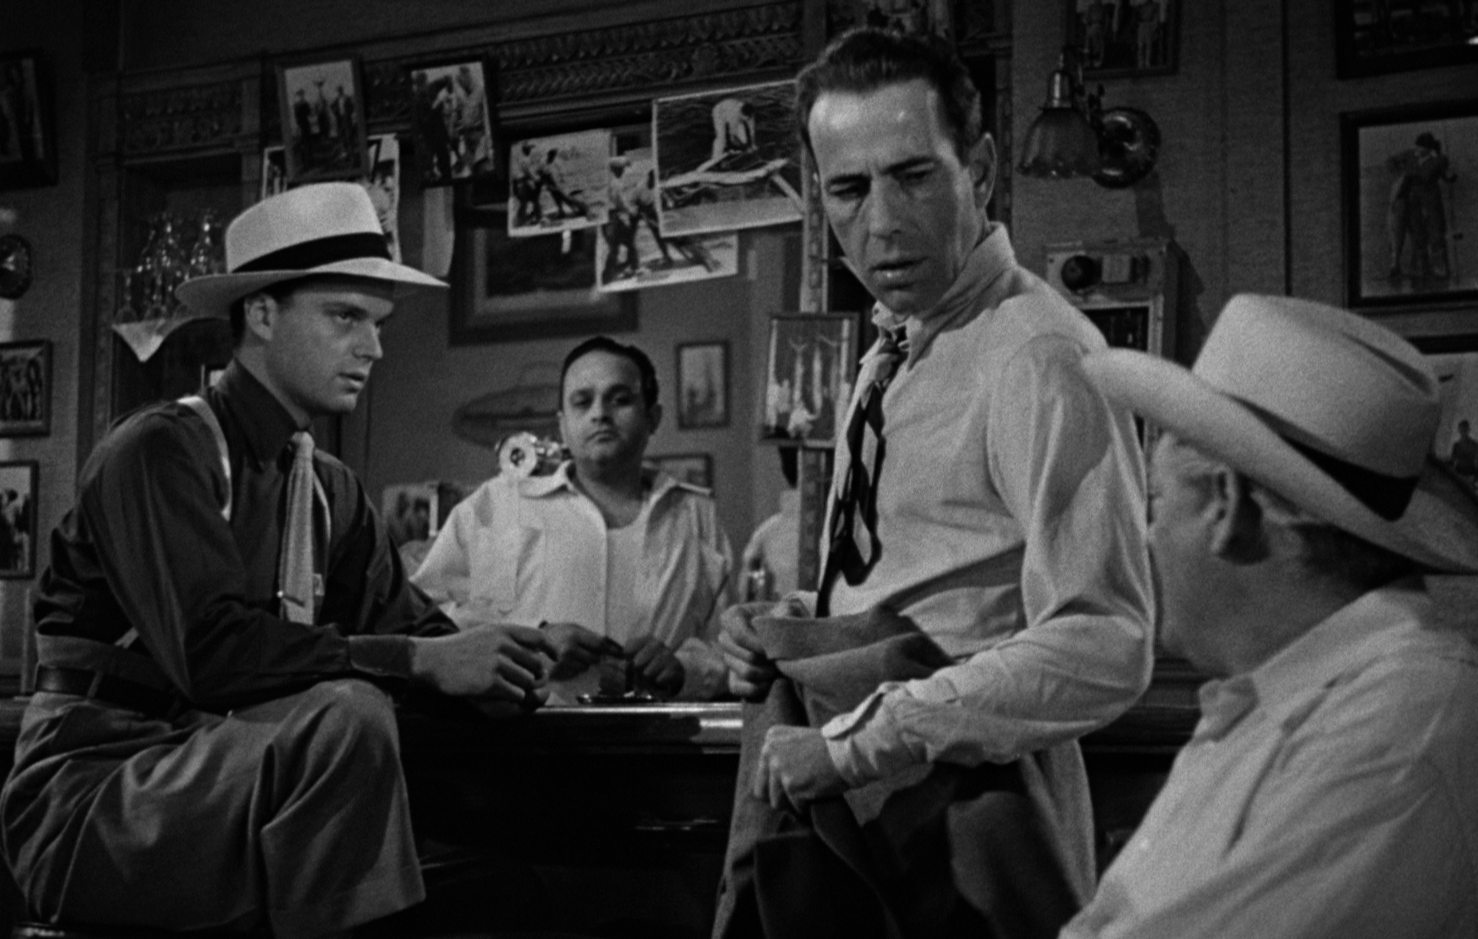 Black and white scene in which Humphrey Bogart turns to the owner at the edge of the picture in the hotel, in the presence of two crooks.